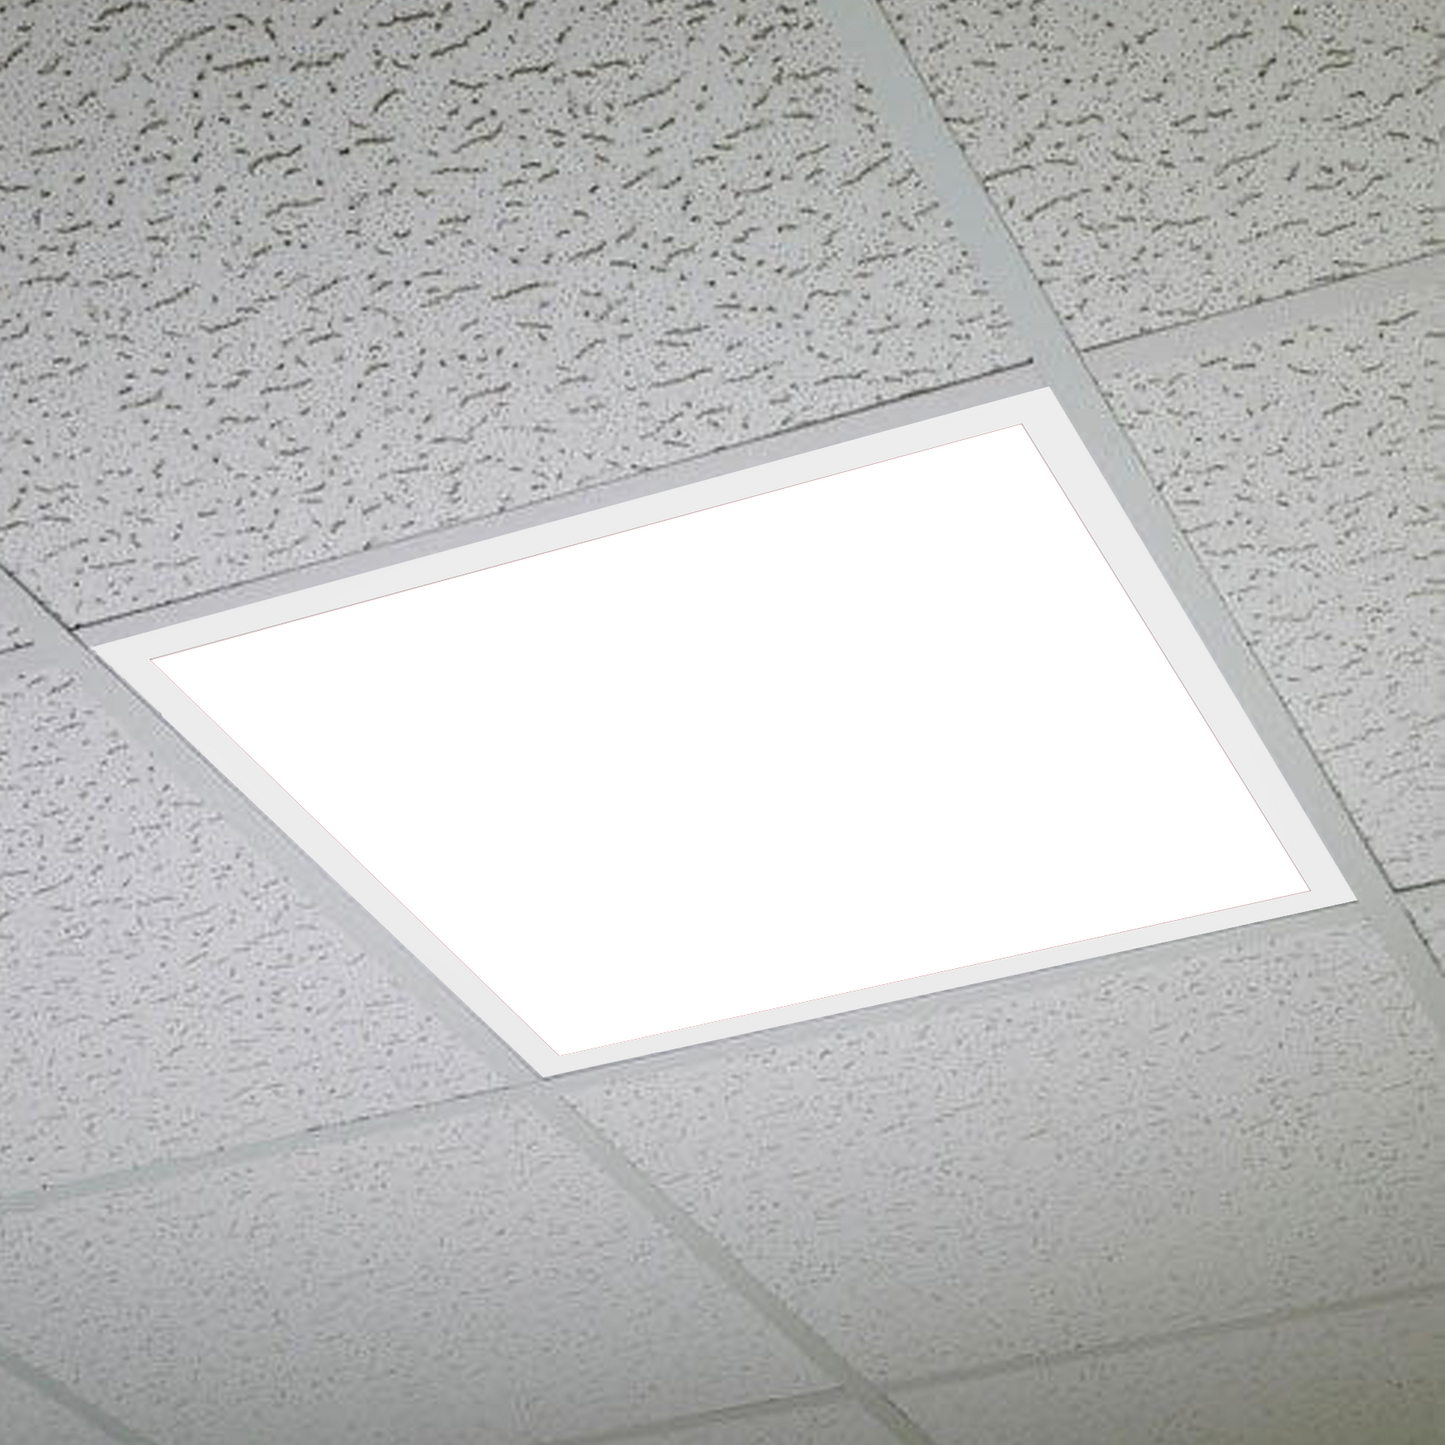 2 ft. X 2 ft. LED Flat Panel Light 4000K Neutral White 40W AC100-277V 5000LM UL DLC Listed Dimmable, LED Drop Ceiling Lights, For Offices Schools Health Care Facilities